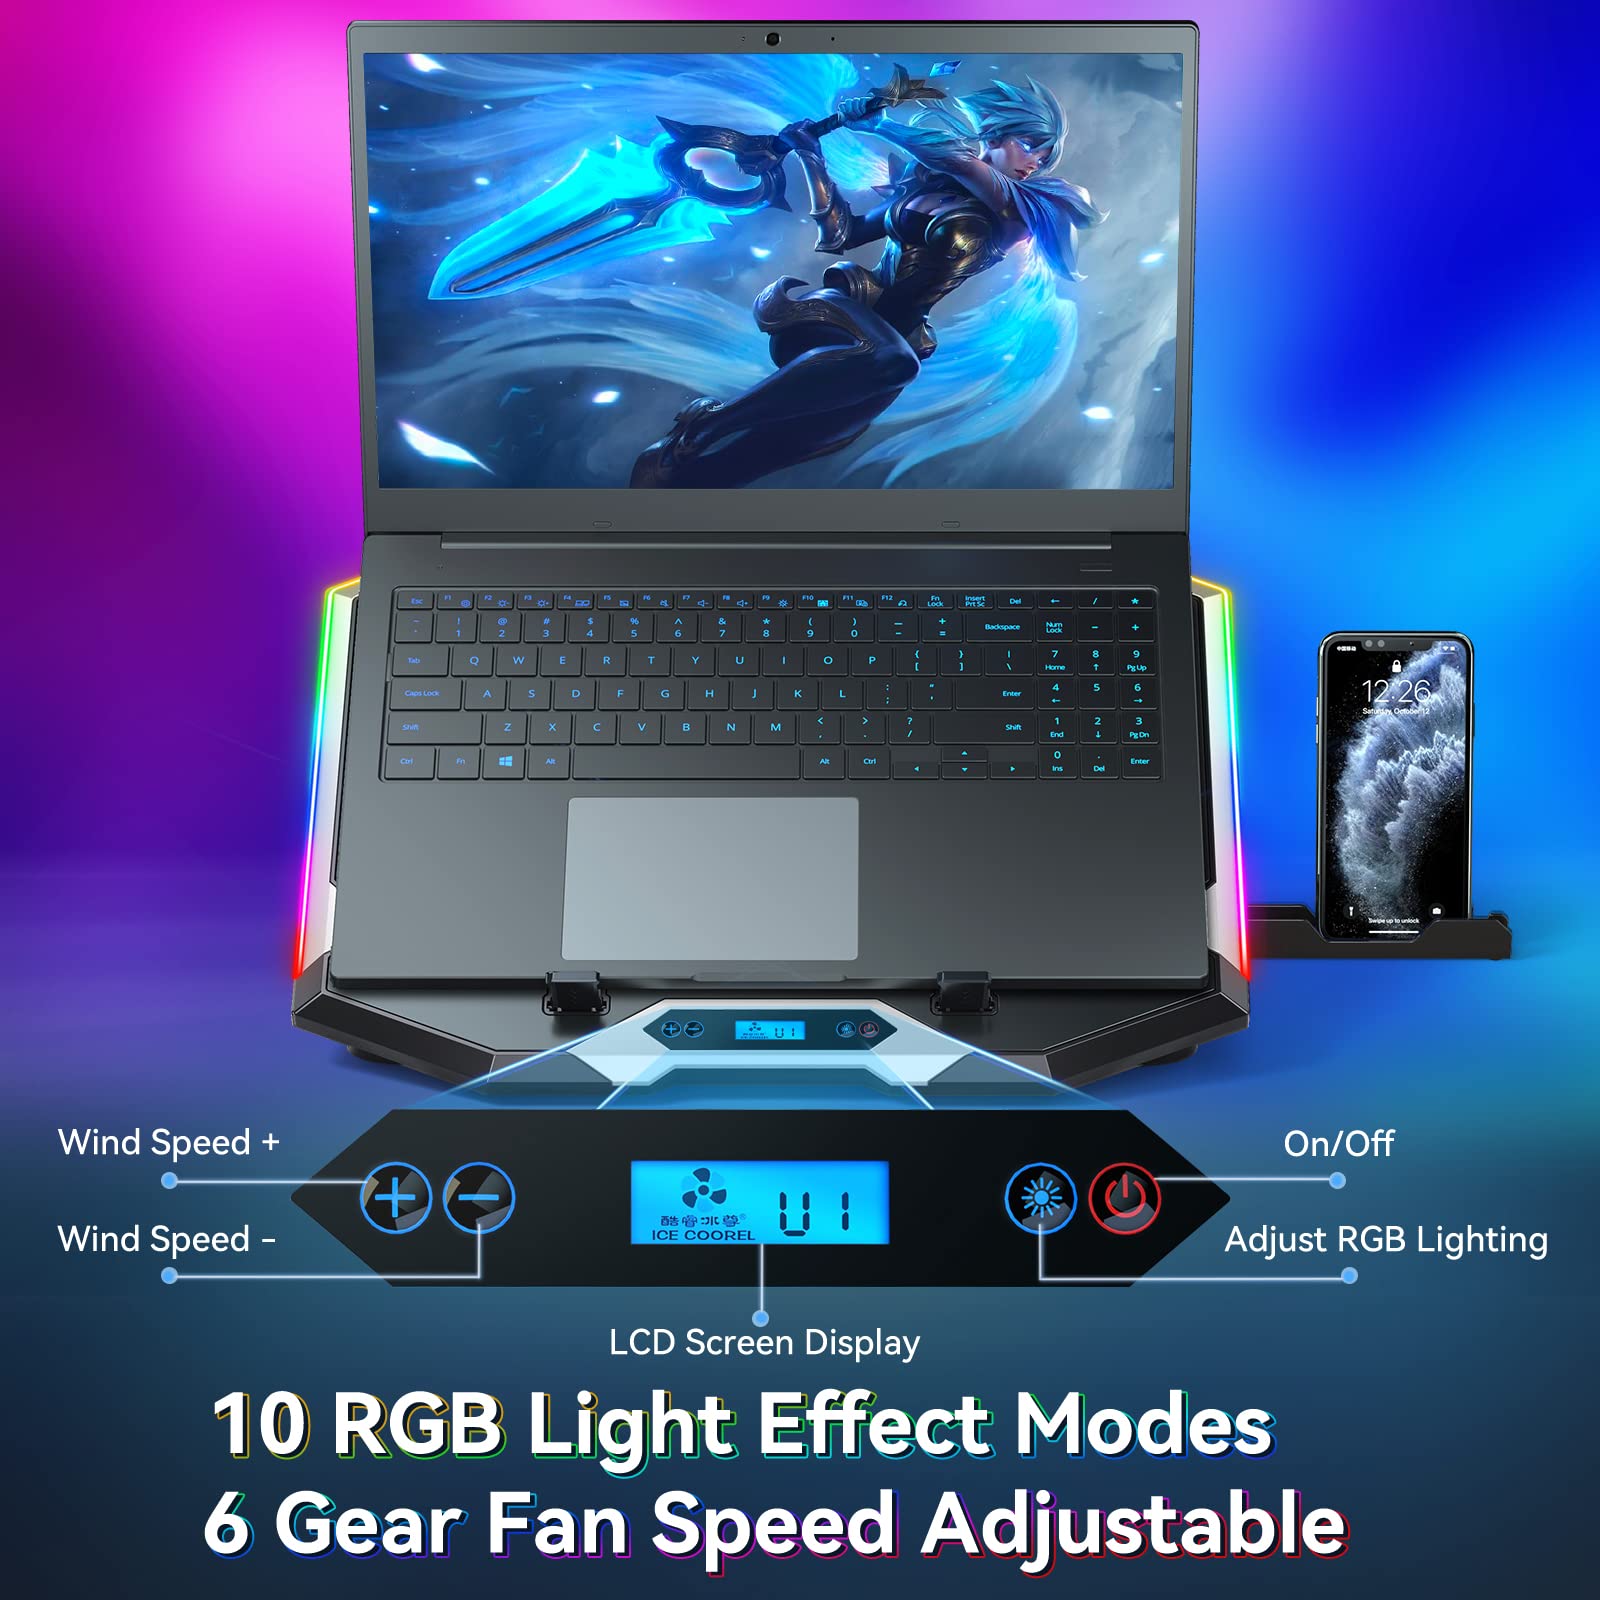 ICE COOREL Gaming Laptop Cooling Pad with 8 Cooling Fans, Laptop Fan Cooling Pad for Laptop 15-17.3 Inch, RGB Laptop Cooler Stand with 6 Height Adjustable, Two USB Port, Phone Stand